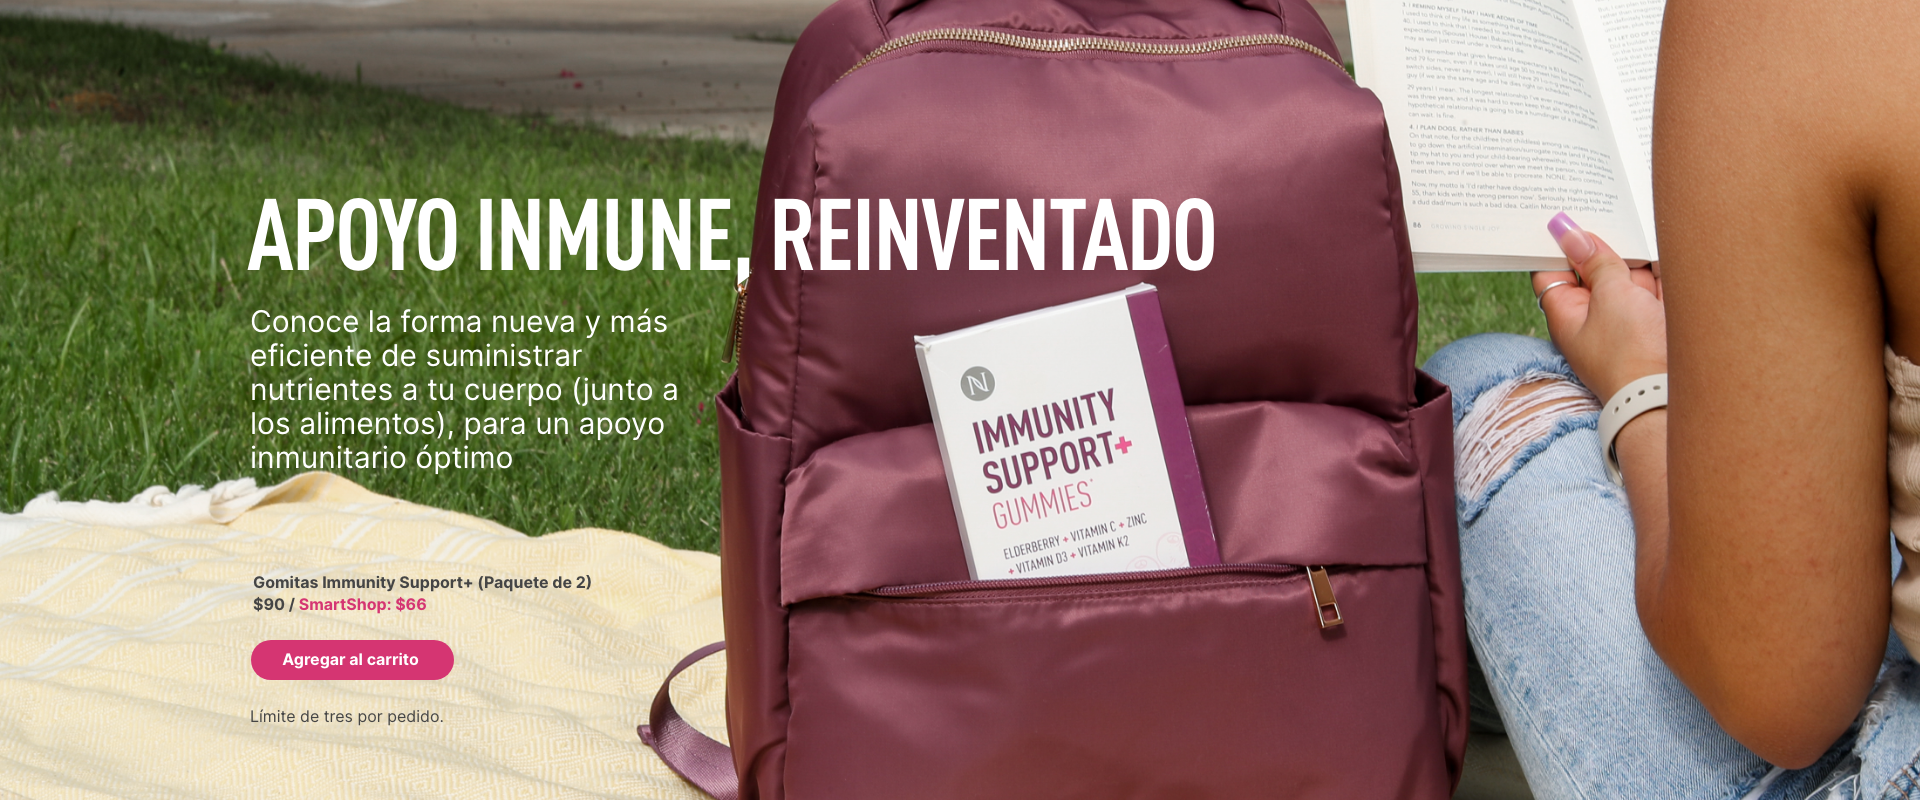 Neora’s NEW Immunity Support+ Gummies in a backpack with a woman sitting next to it reading a book.